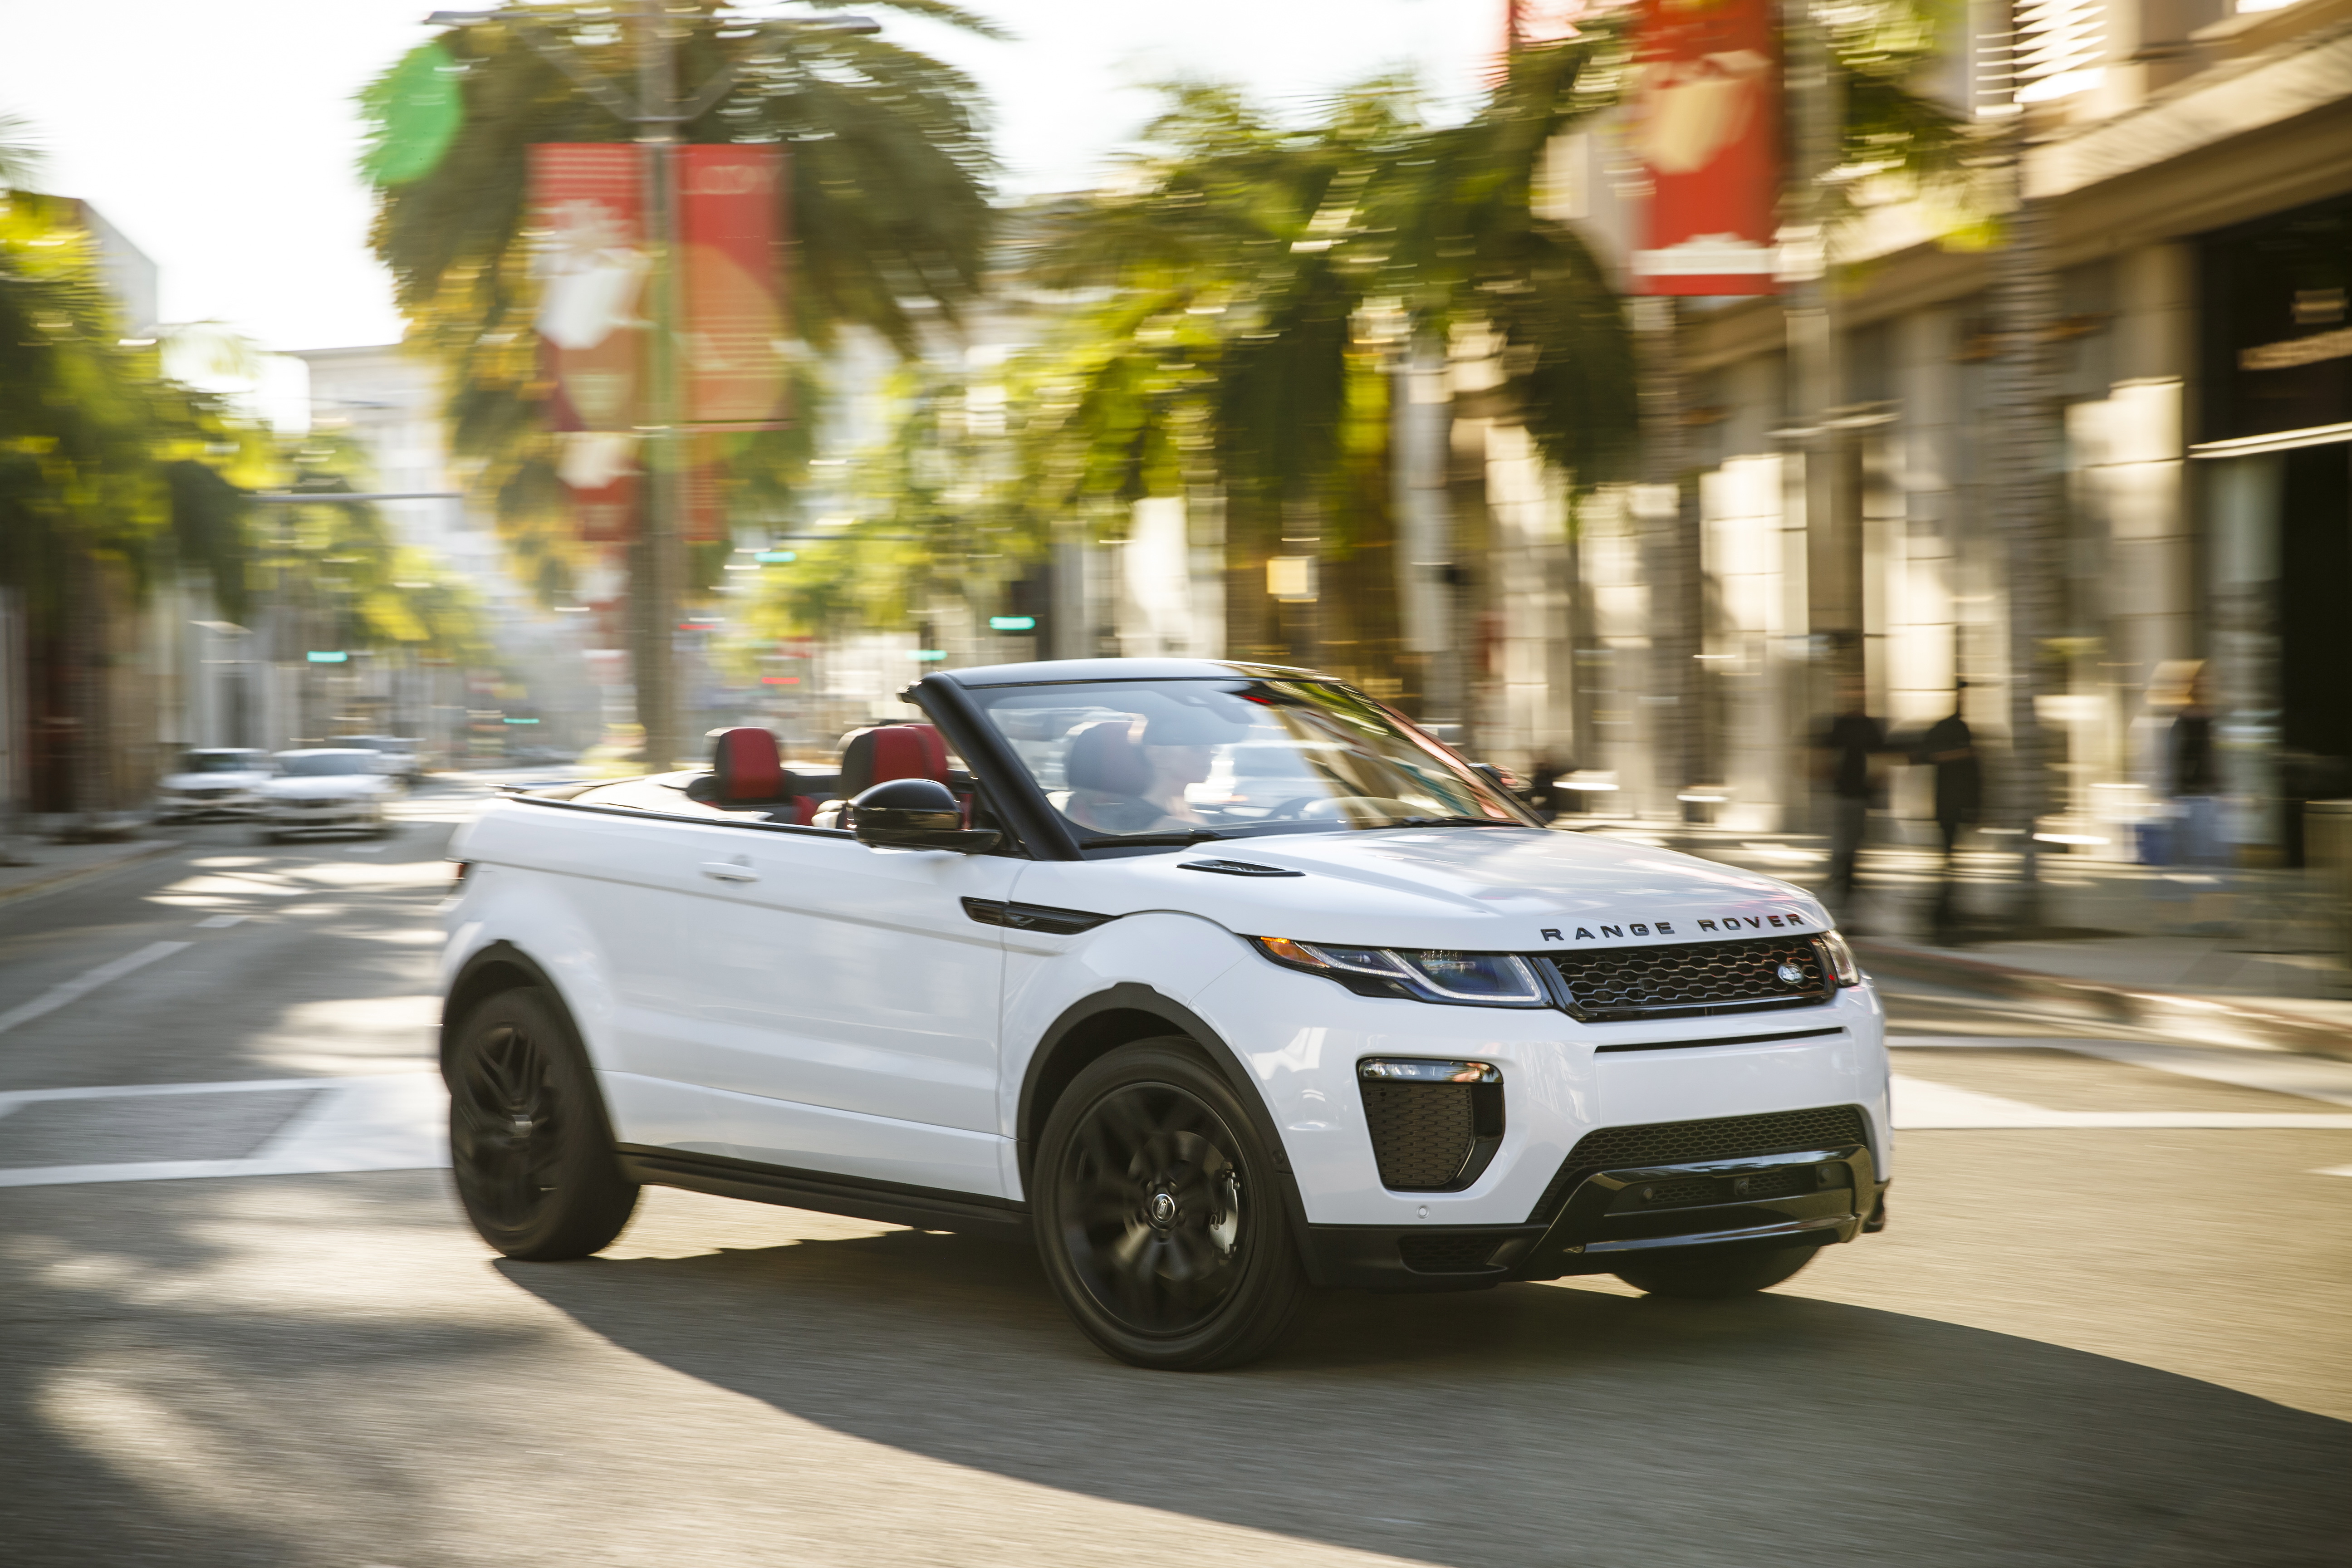 Land Rover Range Rover Evoque accessories specifications